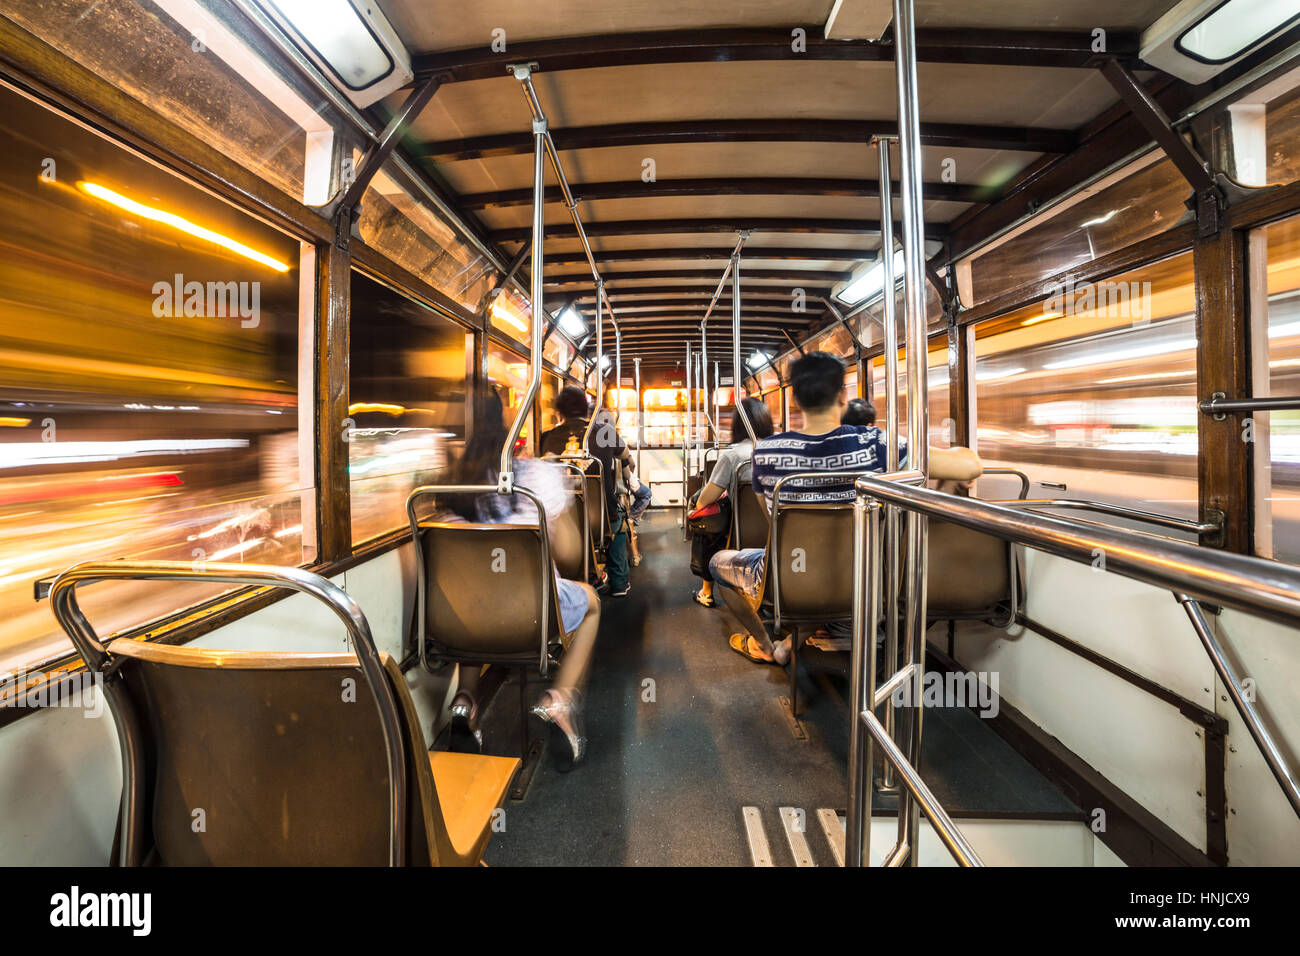 Interior of a Tram car rushing through Hong Kong island streets at night. Wide angle and long exposure are used. Stock Photo